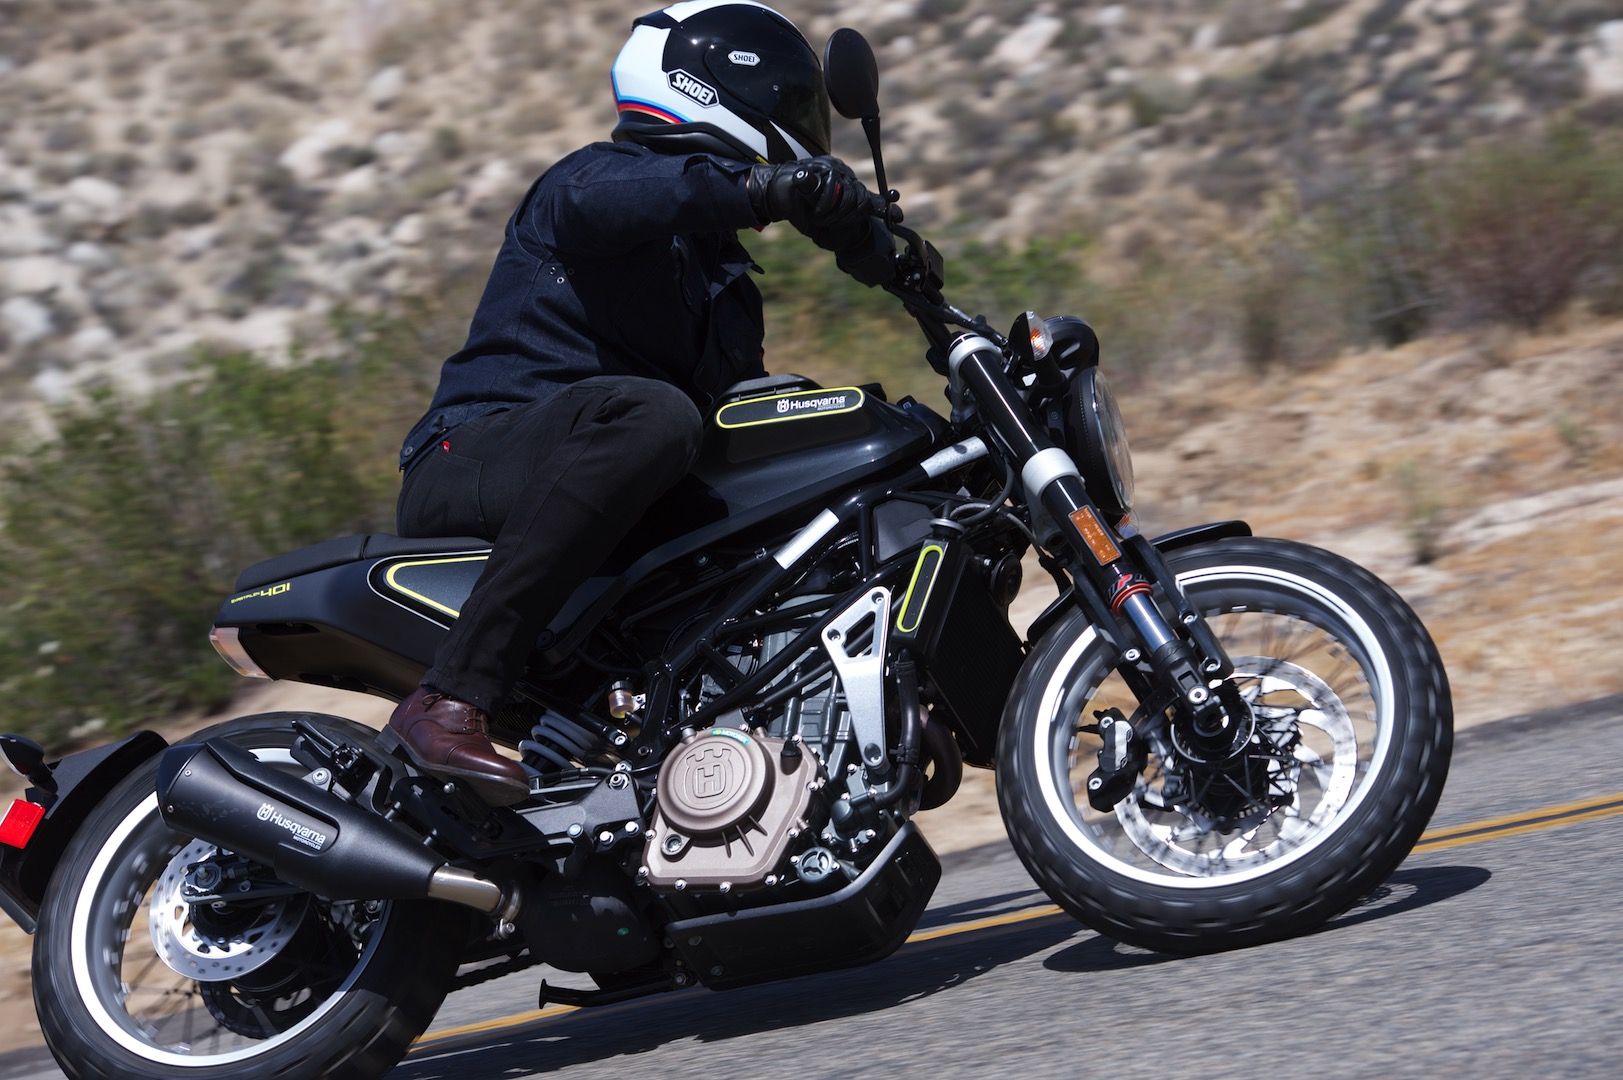 Review of the best motorcycle jeans of 2022